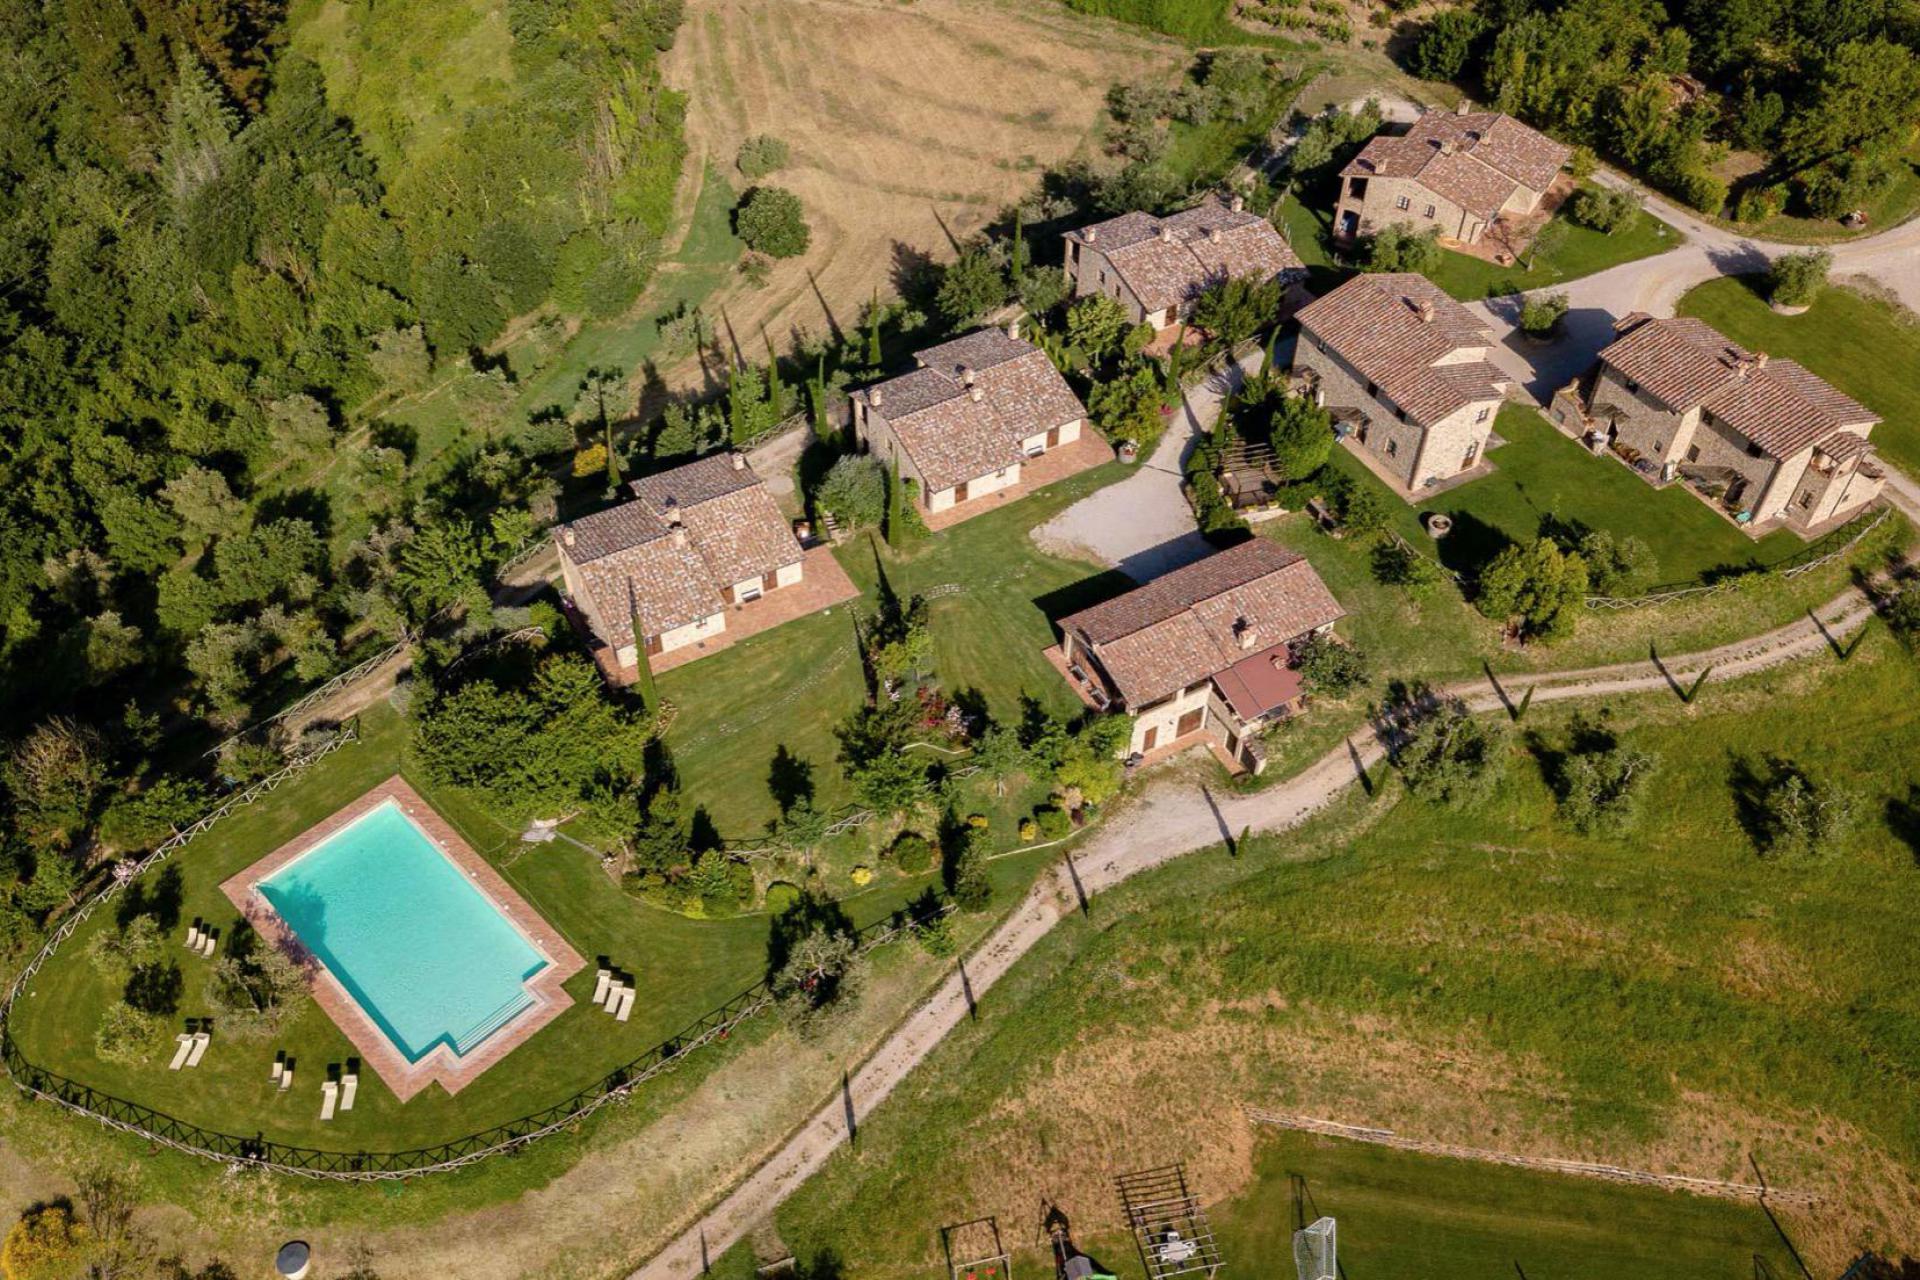 Agriturismo Umbria Agriturismo between Tuscany and Umbria, within walking distance of a village